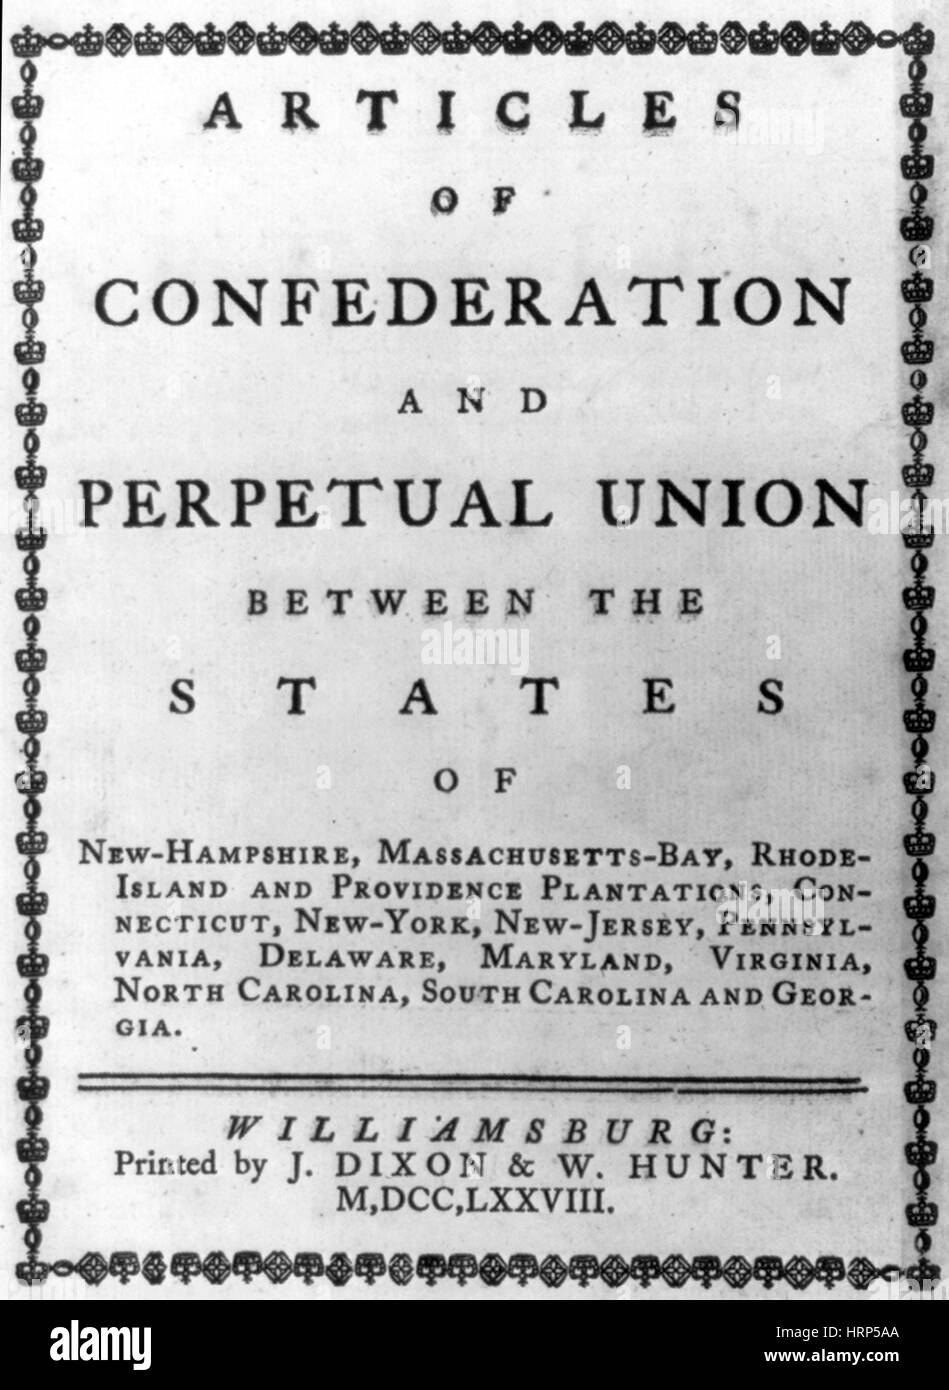 Articles of Confederation, 1777 Stock Photo